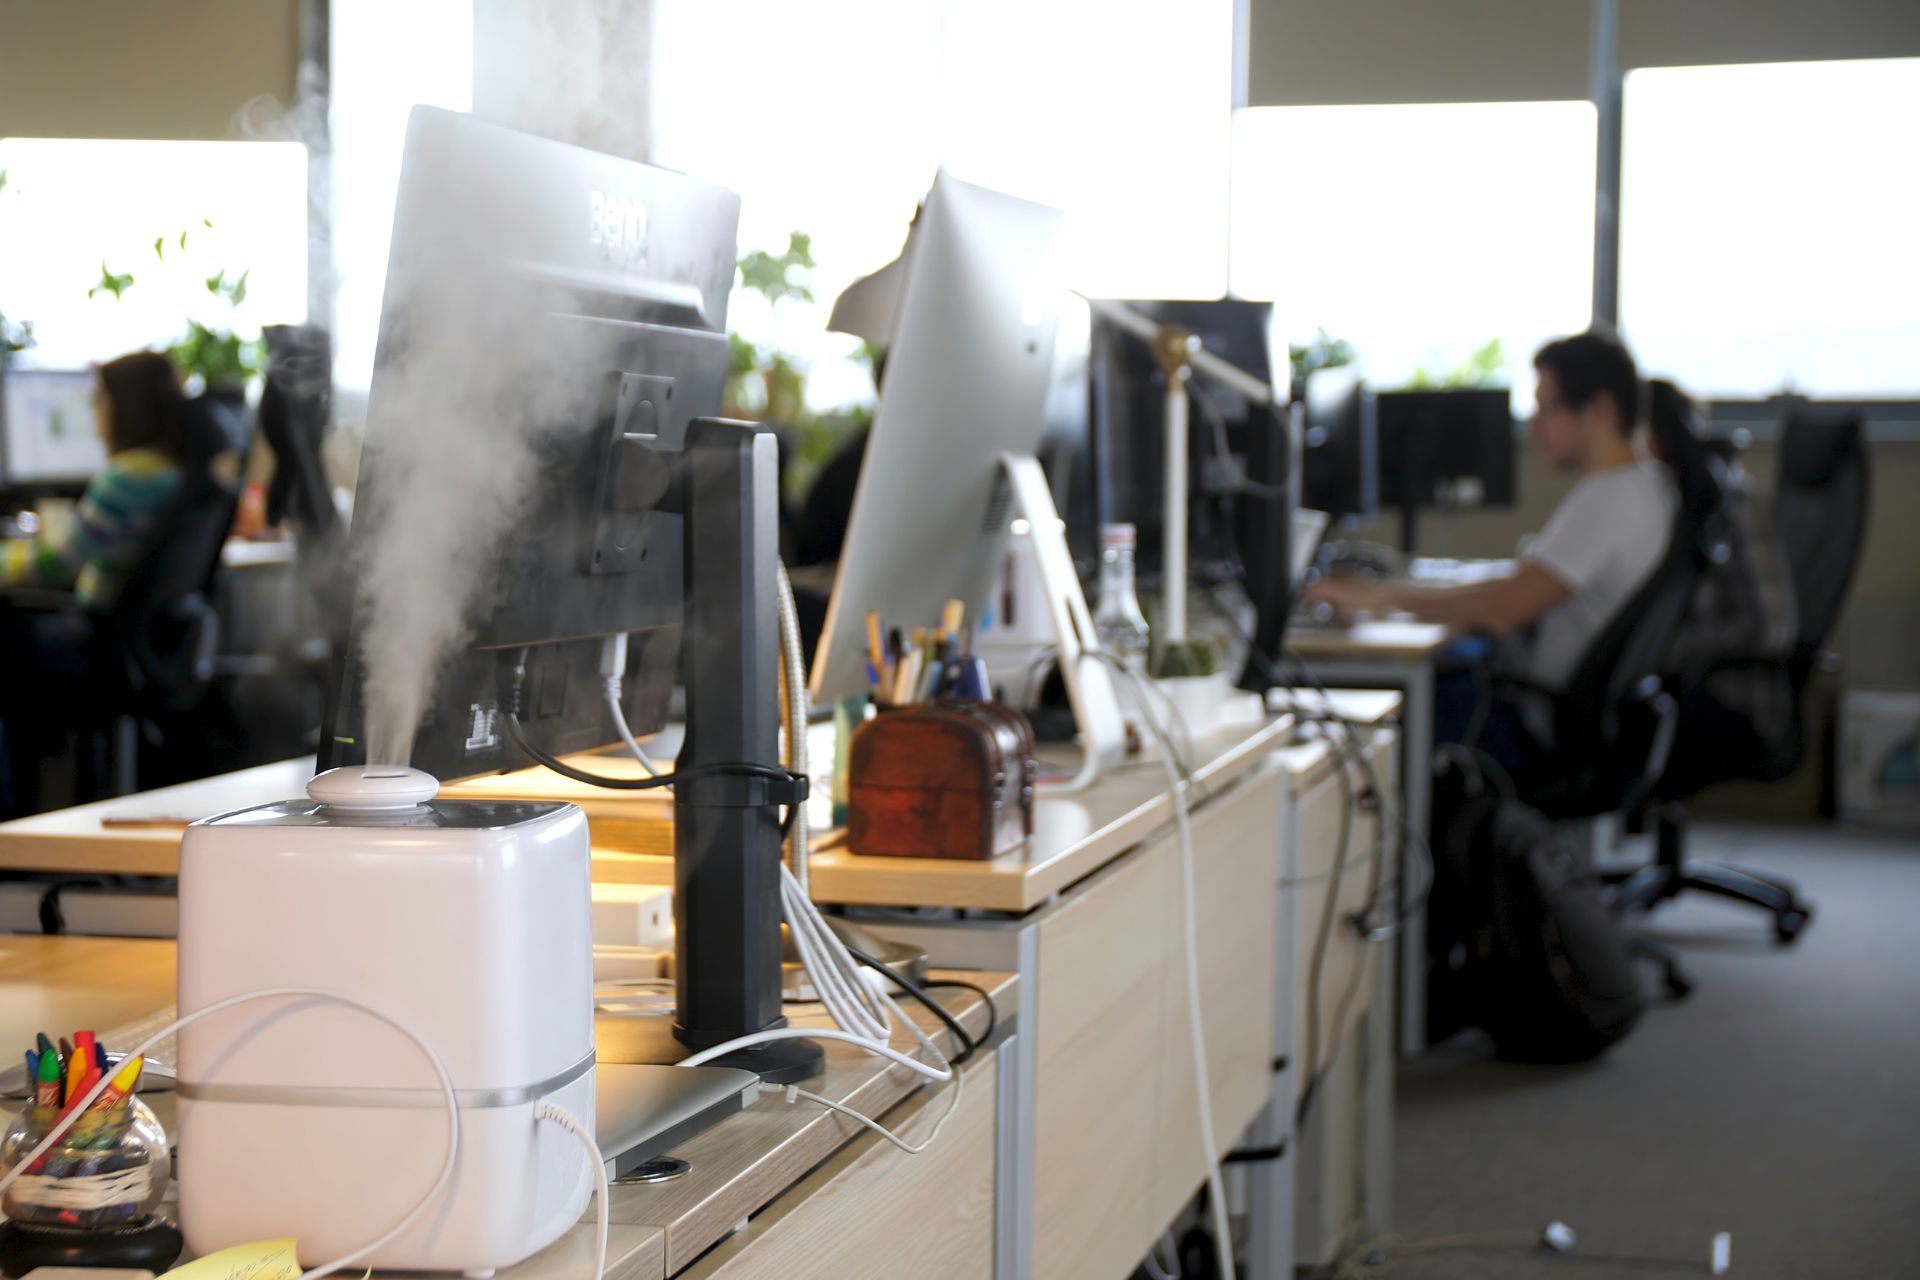 A working humidifier on top of an employee’s desk in an office